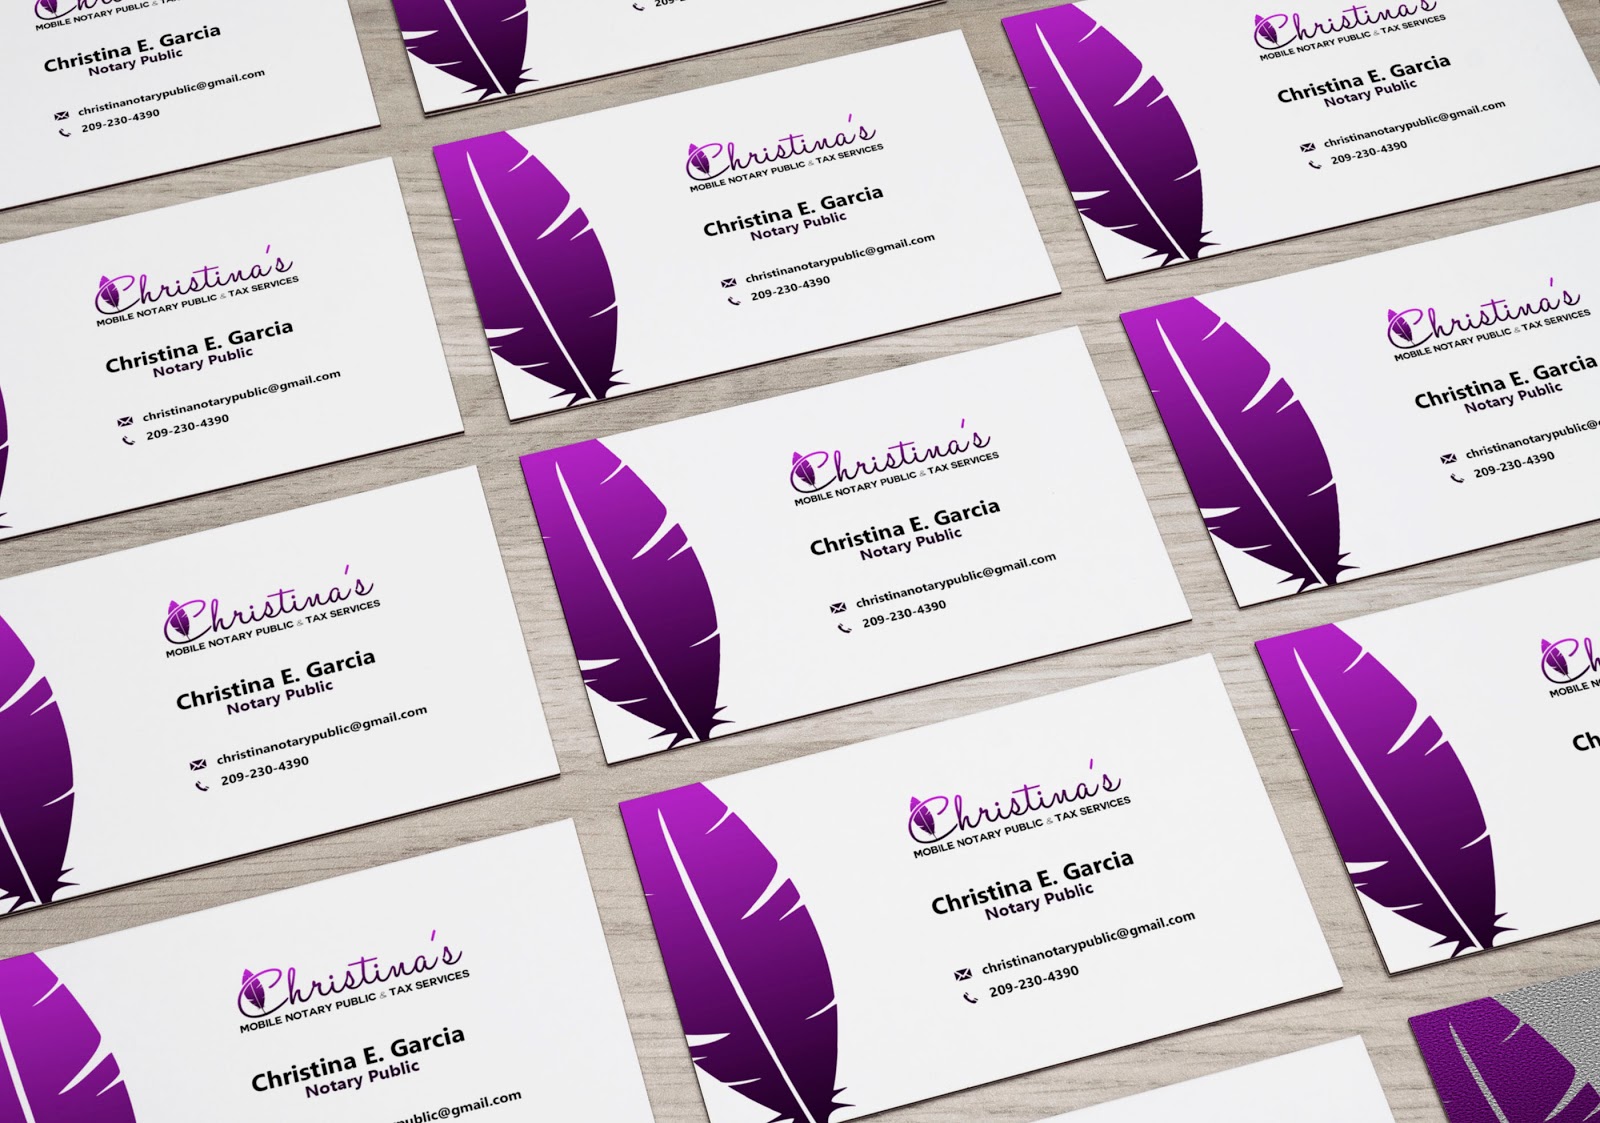 mobile notary business cards 1